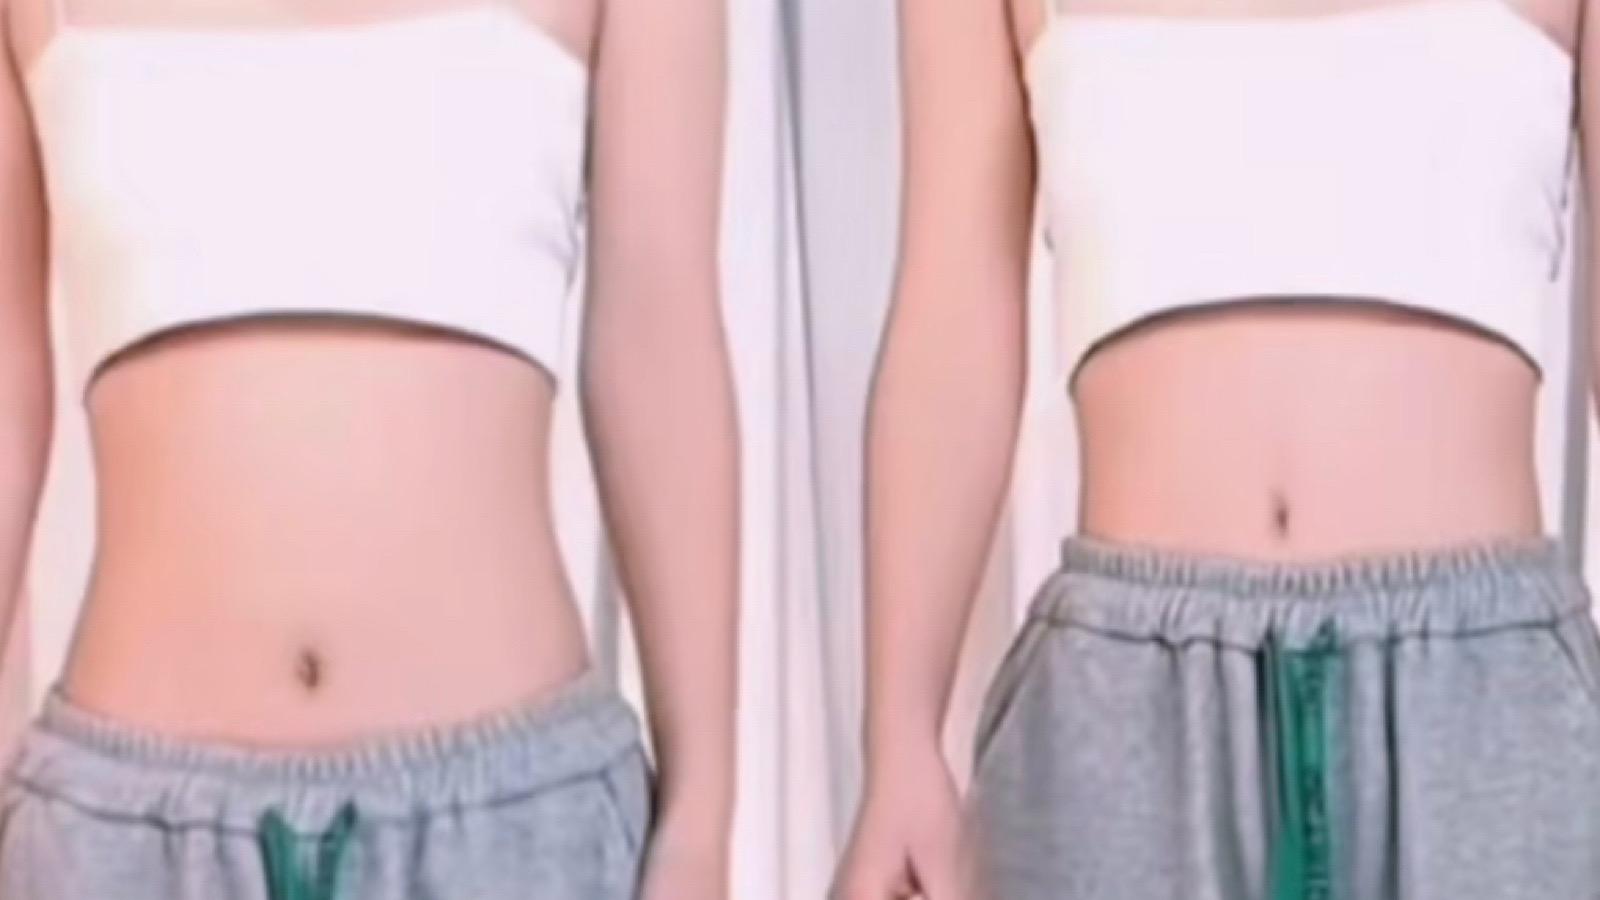 Women are wearing fake belly buttons to conceal their true height